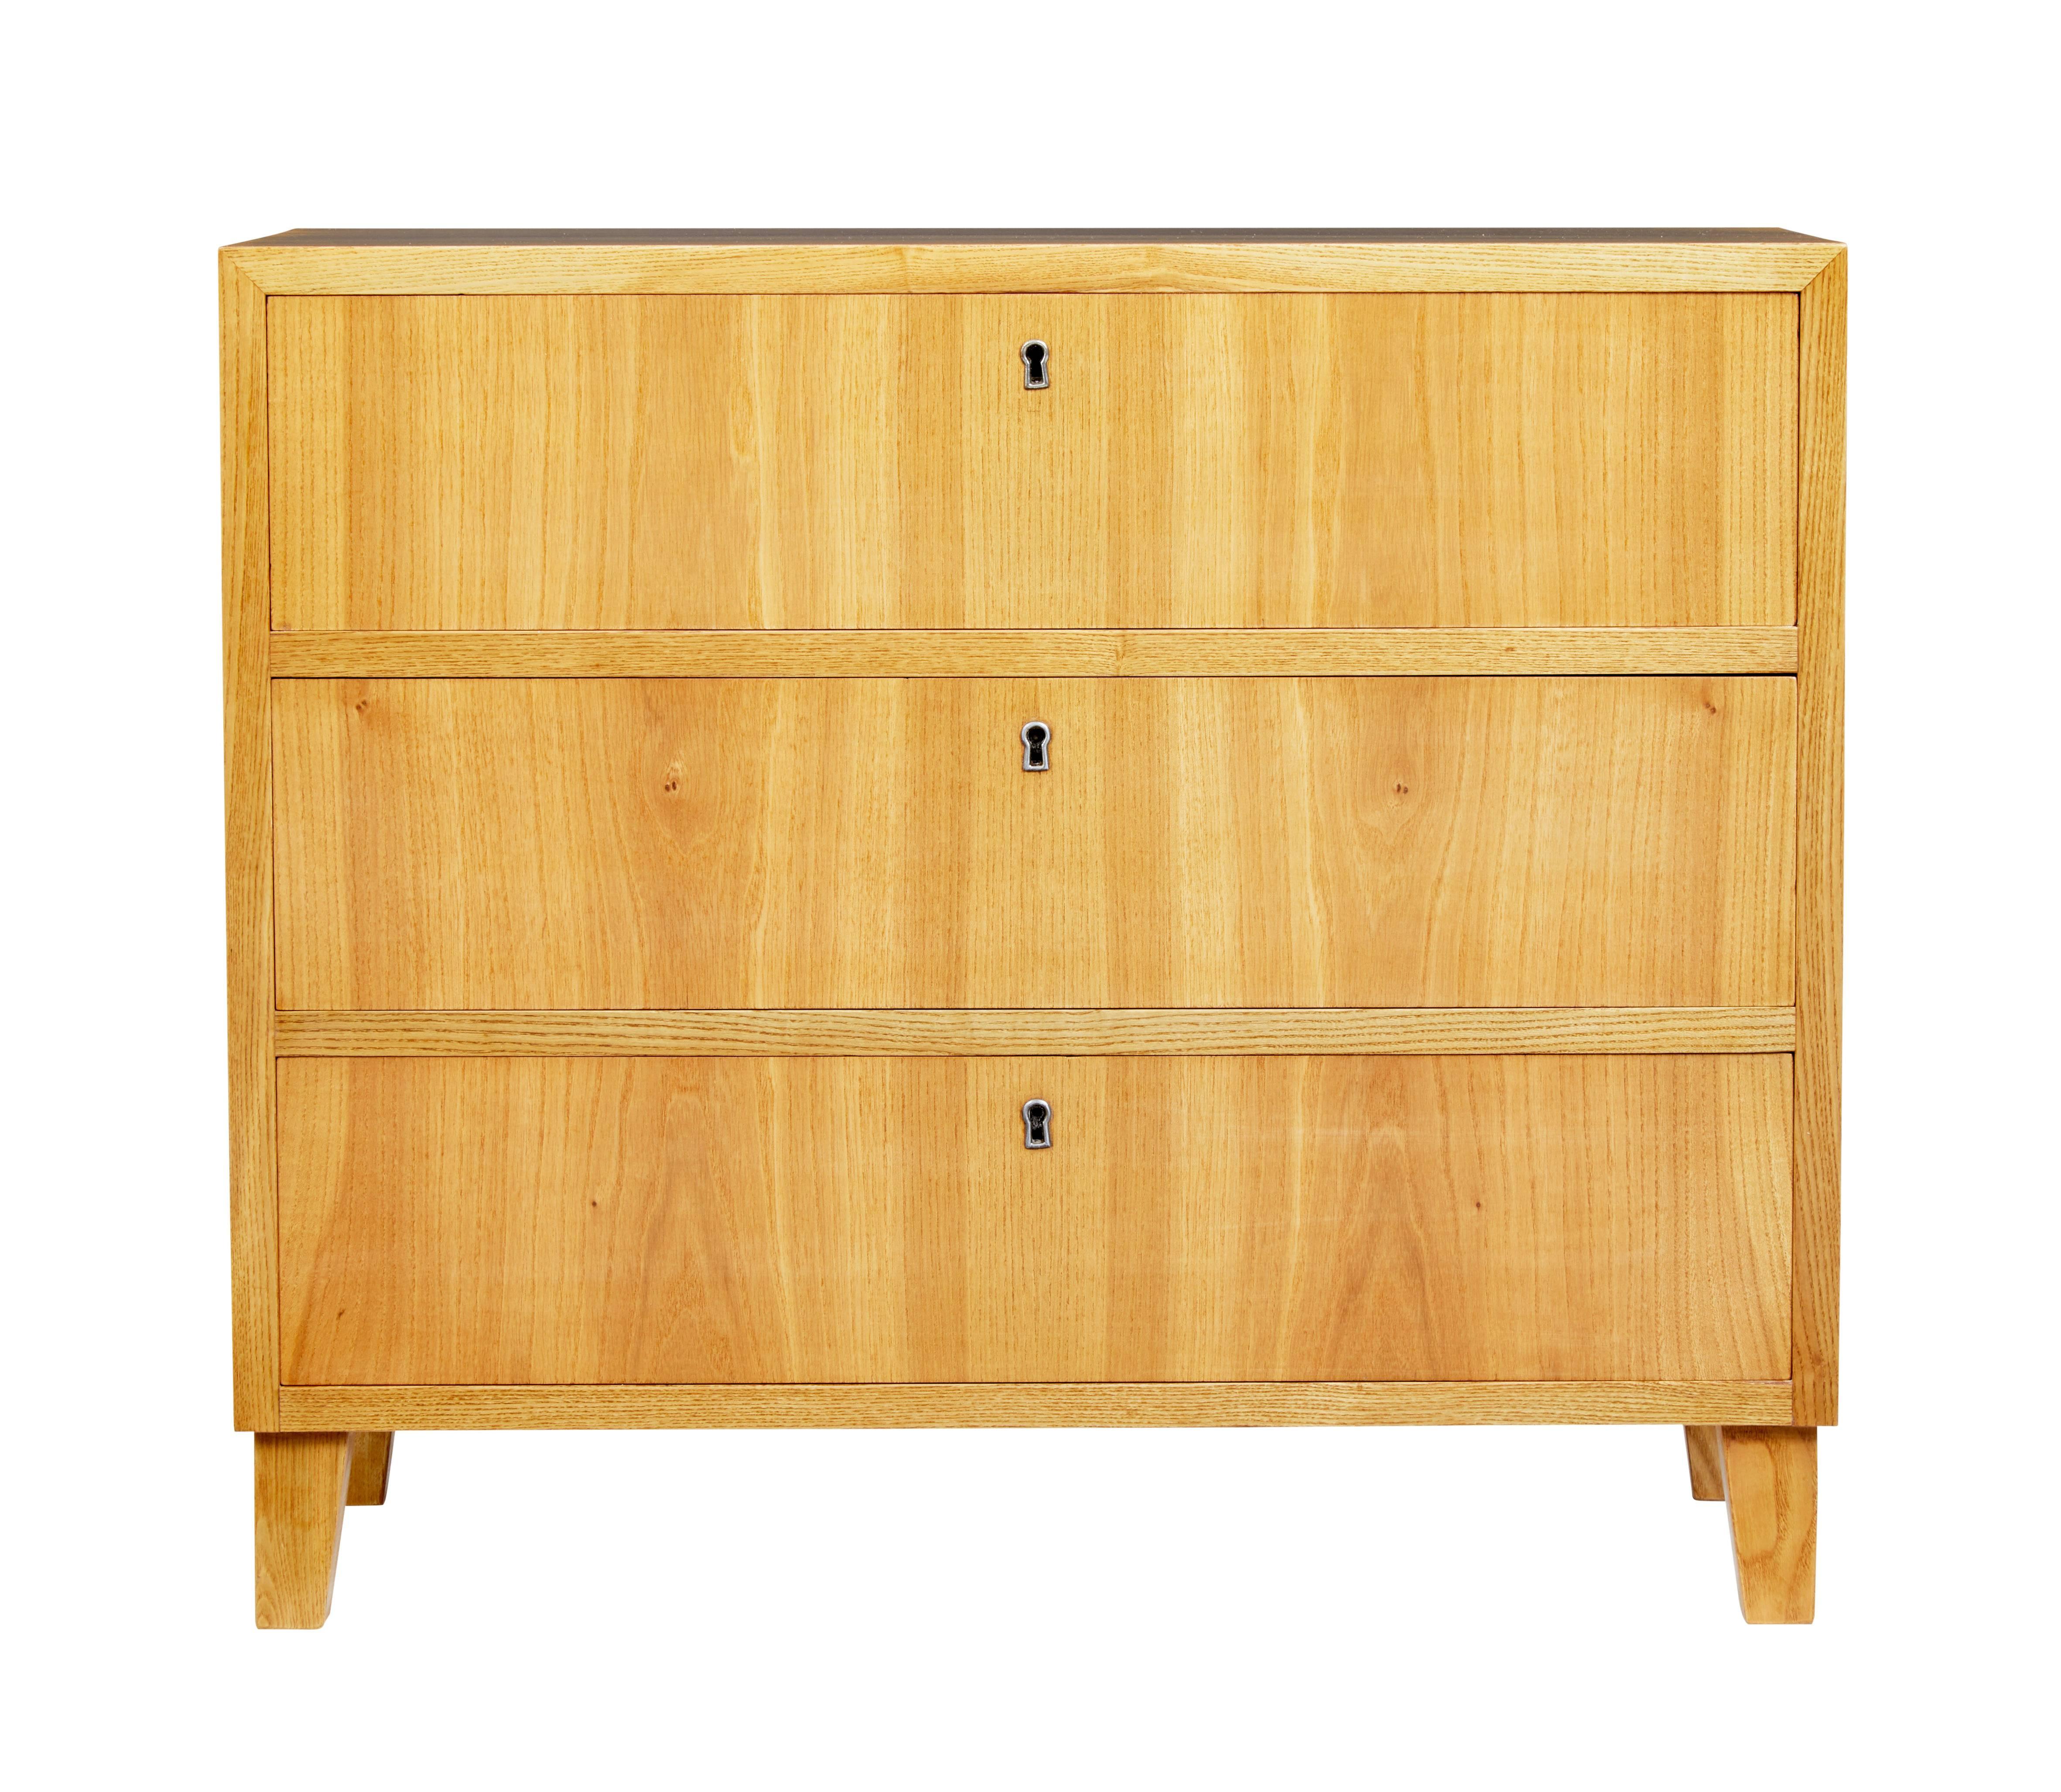 Elegant chest of drawers of small proportions, circa 1950.

Three drawers which open on the key. Lovely light color. Standing on tapered legs.

One very light scratch to side which has been polished over.